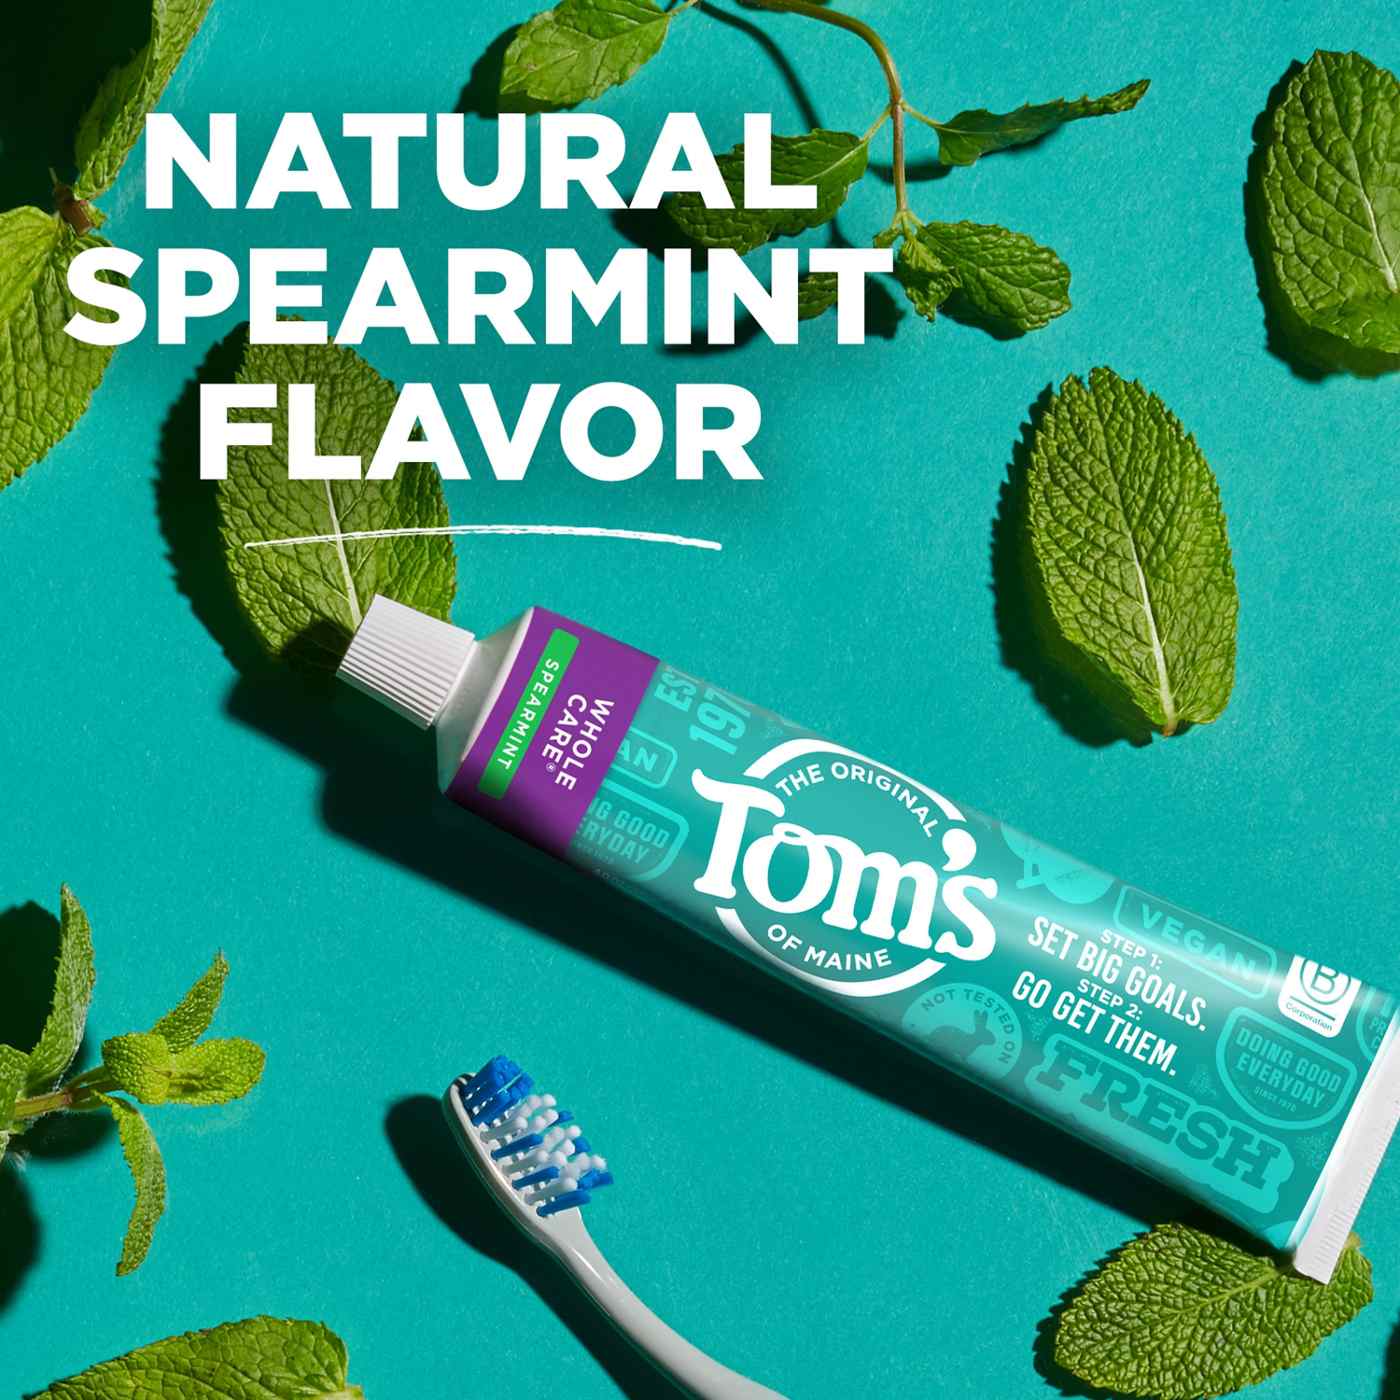 Tom's of Maine Whole Care Natural Fluoride Toothpaste - Spearmint; image 6 of 8